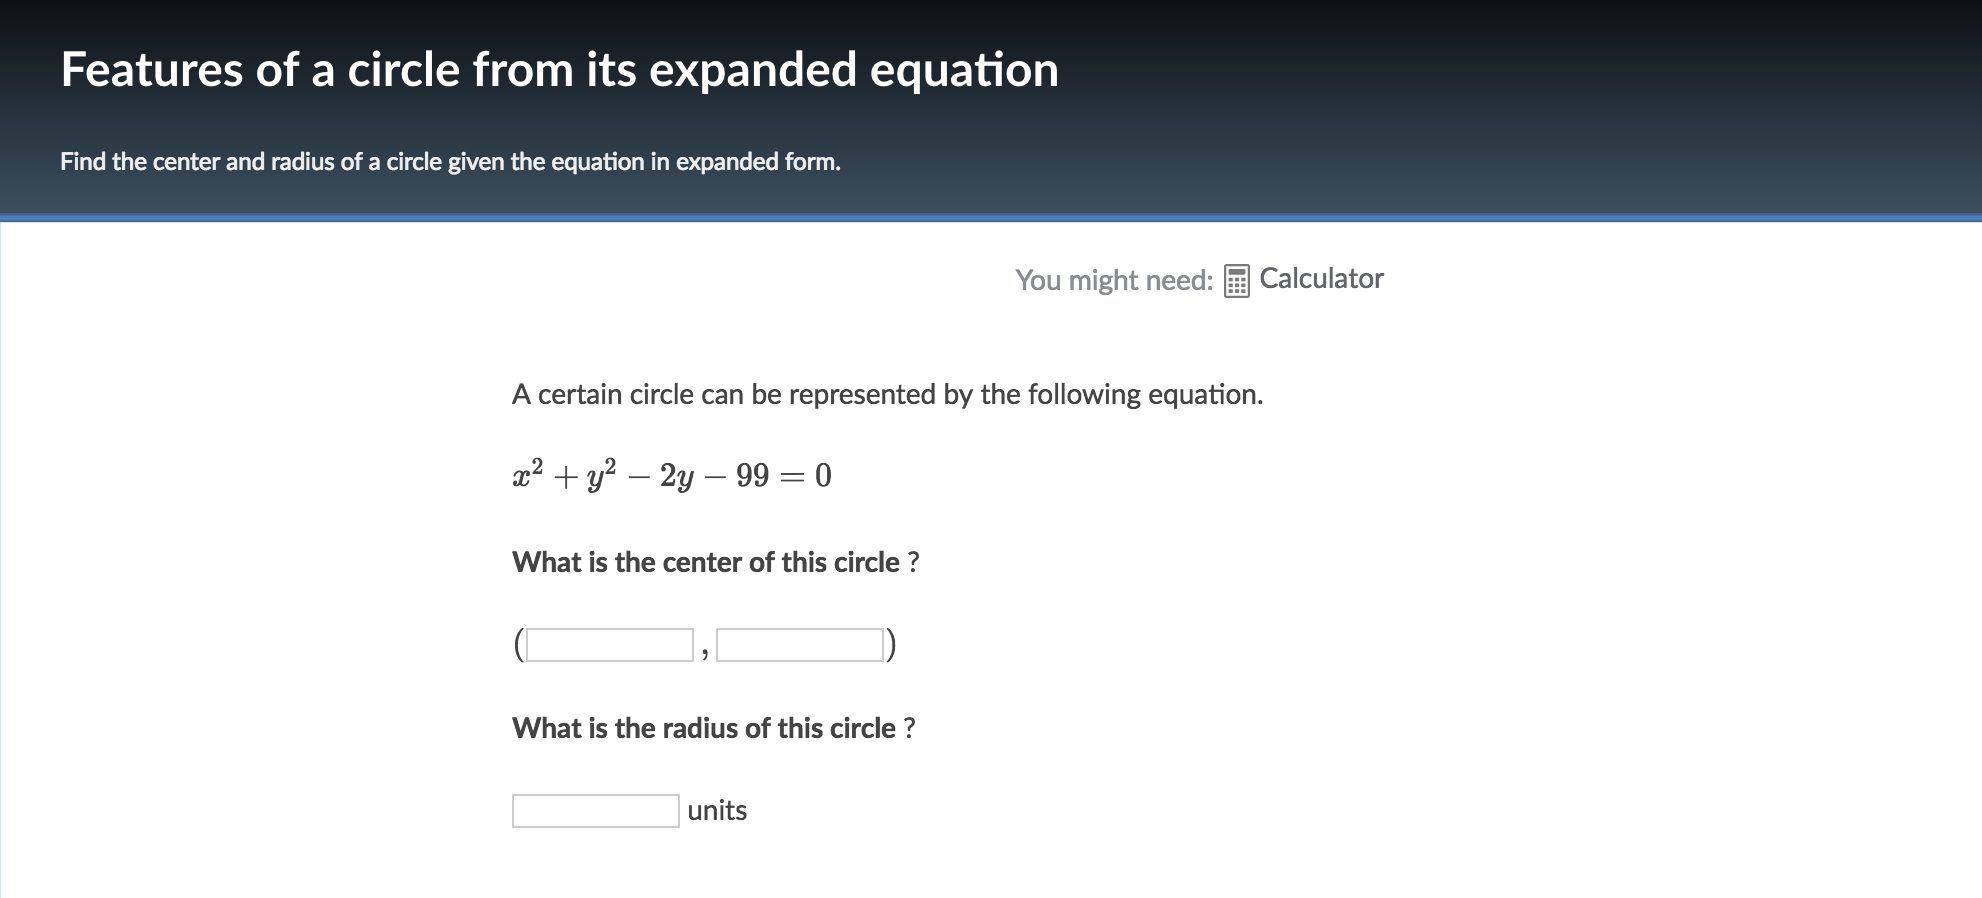 Features of a circle from its expanded equation
Find the center and radius of a circle given the equation in expanded form
You might need:
Calculator
A certain circle can be represented by the following equation.
What is the center of this circle ?
What is the radius of this circle?
units
